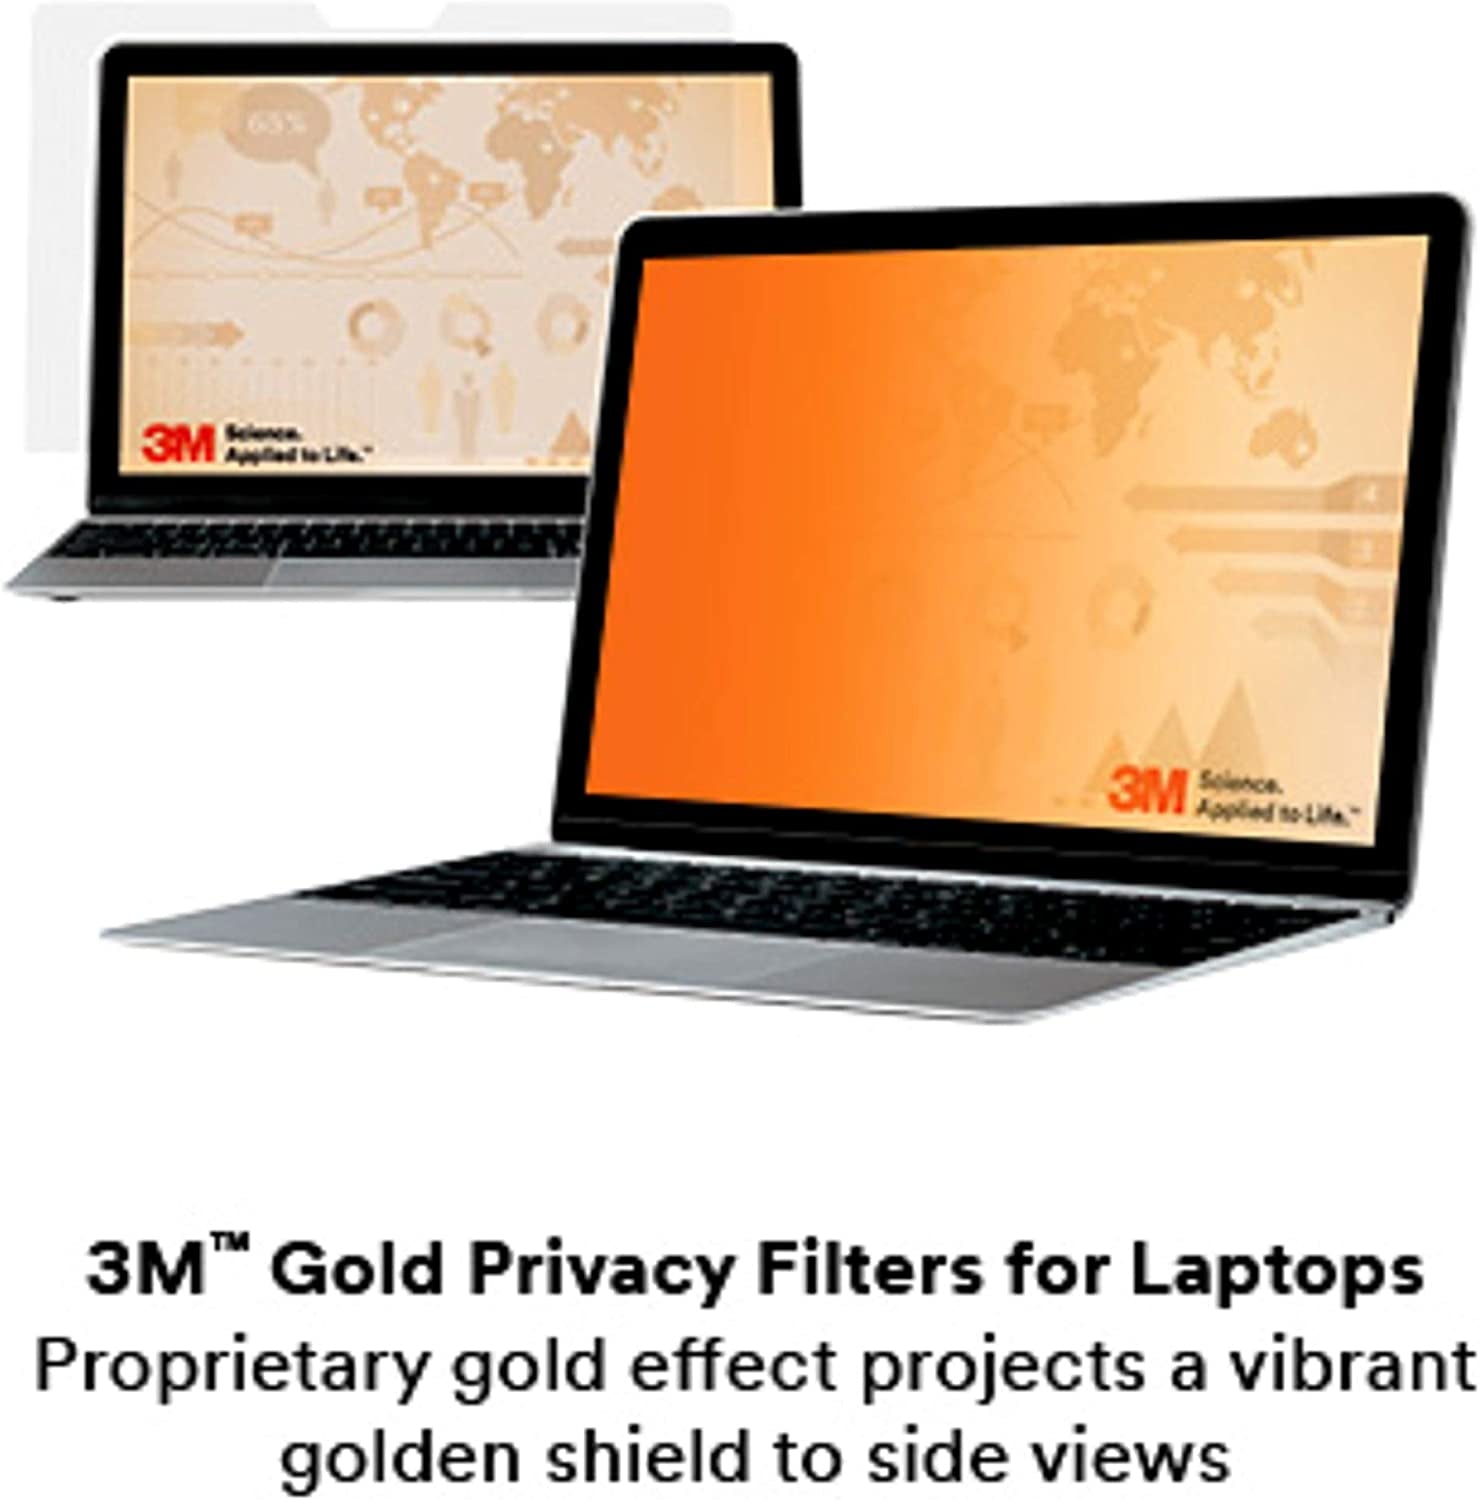 3M-GF_Gold_Privacy-Screen_Filter-Laptop_Comply_Flip_Attach_yv_hk-1.jpg